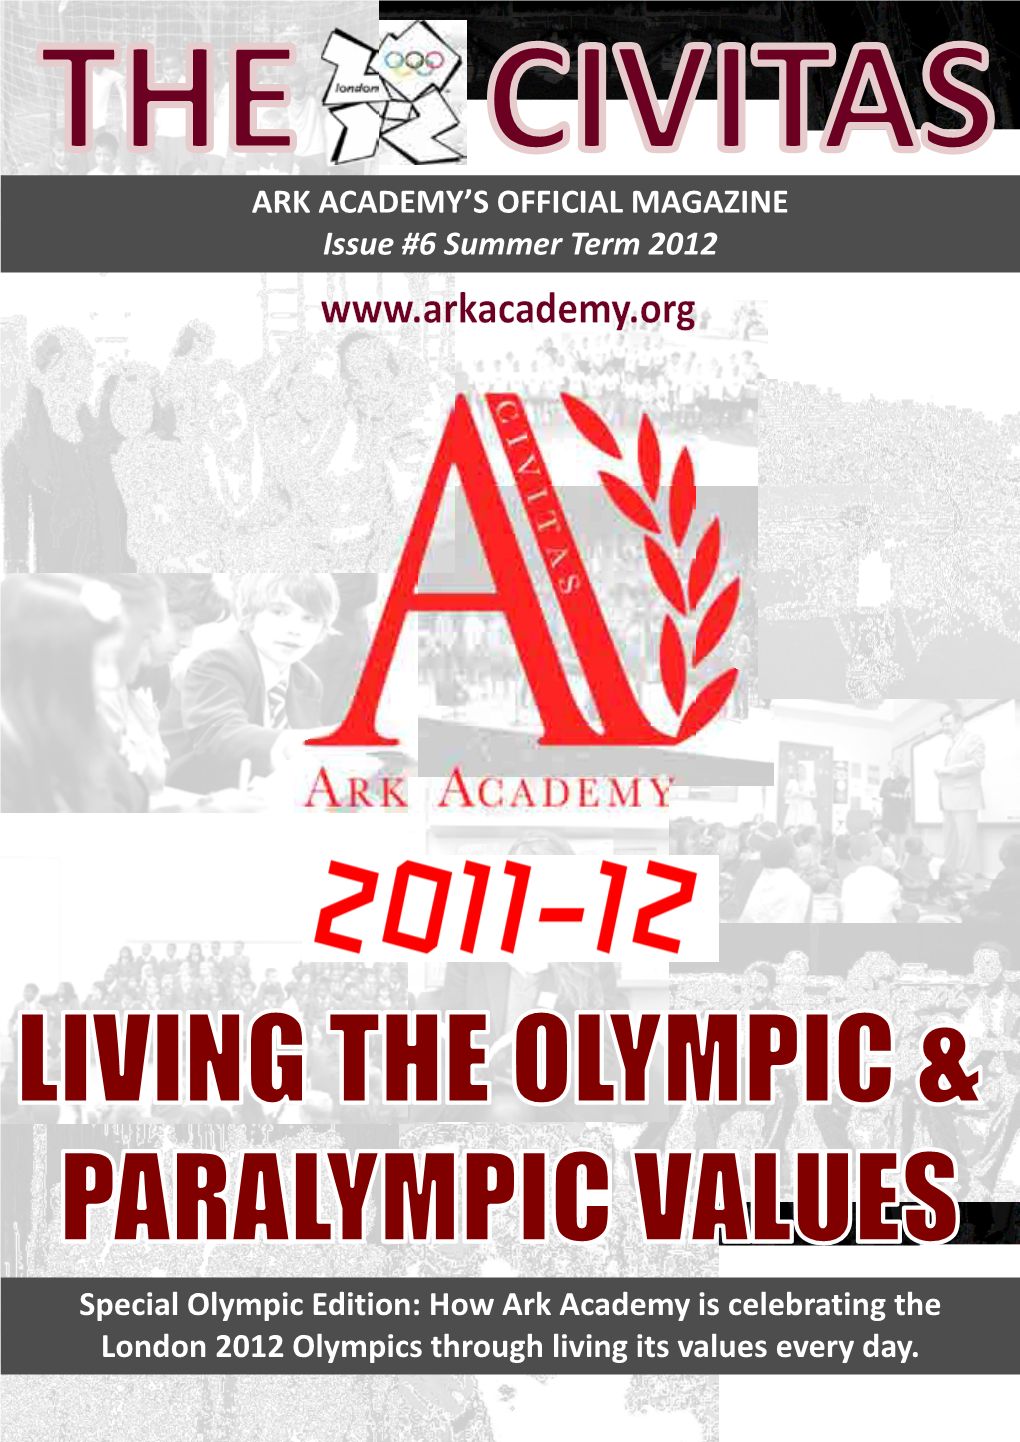 How Ark Academy Is Celebrating the London 2012 Olympics Through Living Its Values Every Day